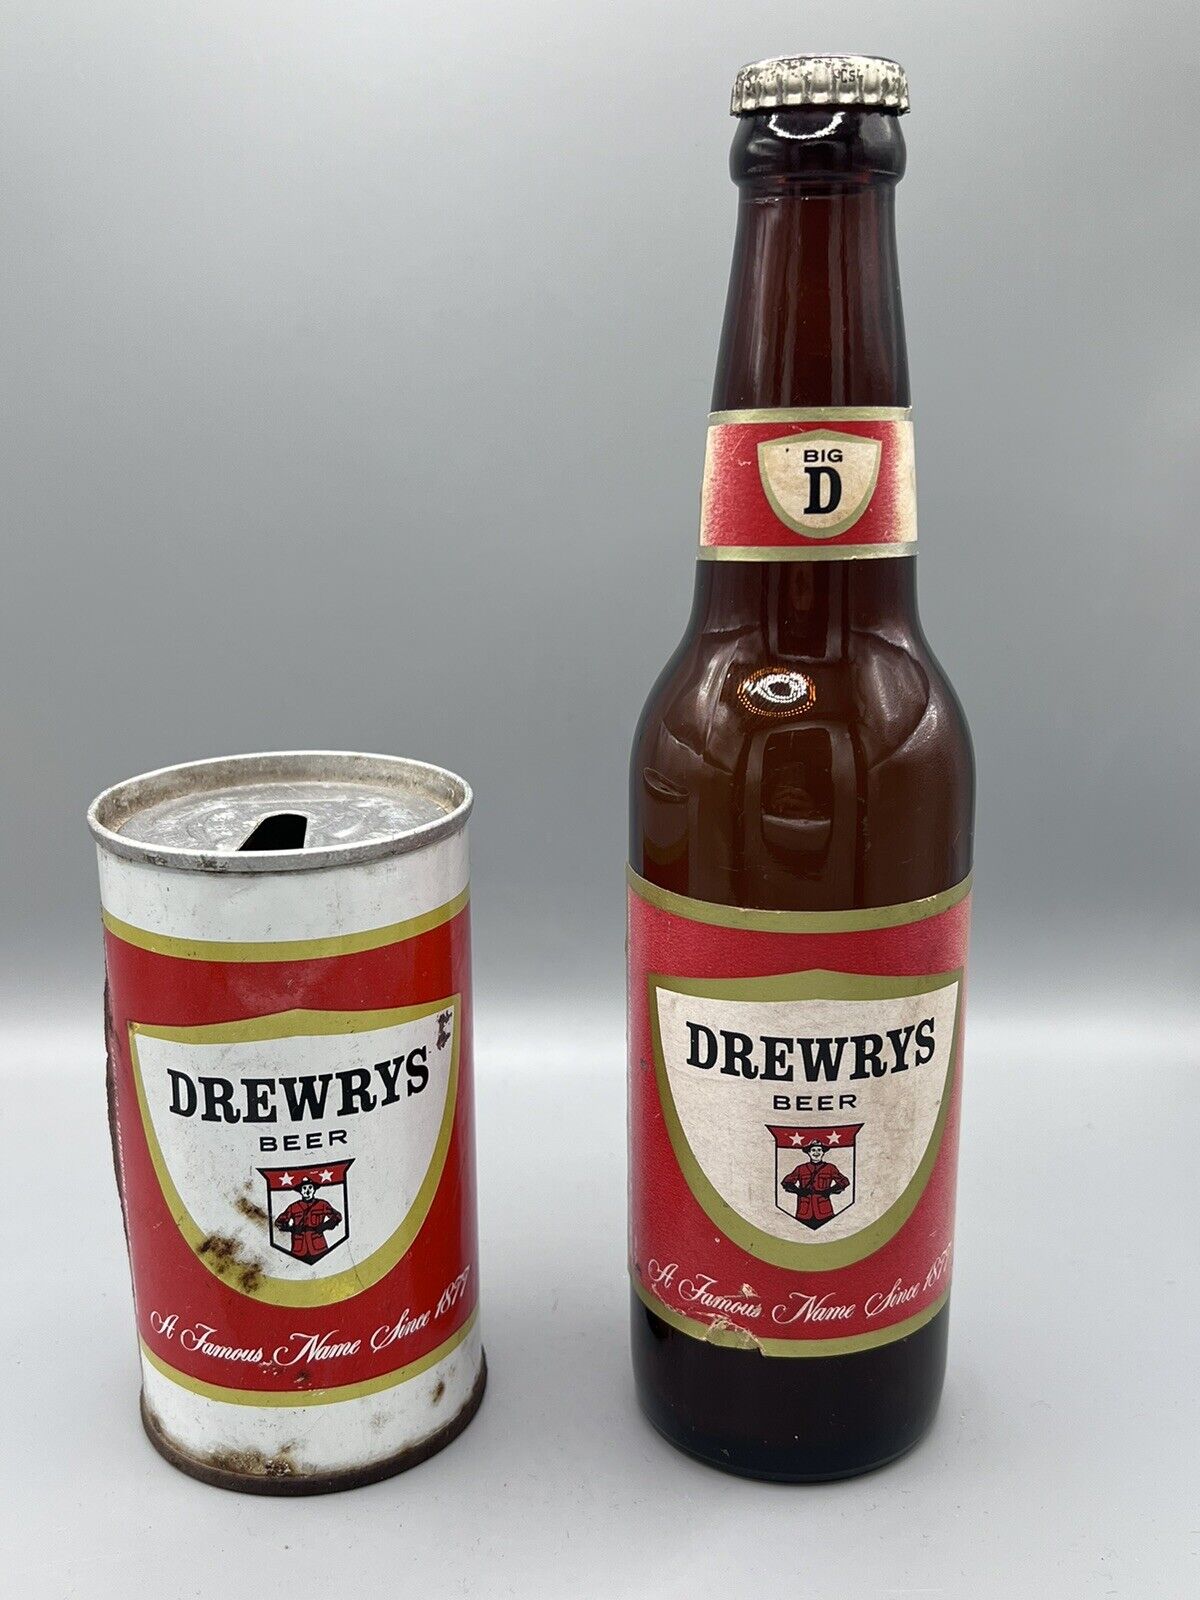 Vintage Drewrys Beer Bottle & Can Display Bottle with Cap Still On. 1946. Empty